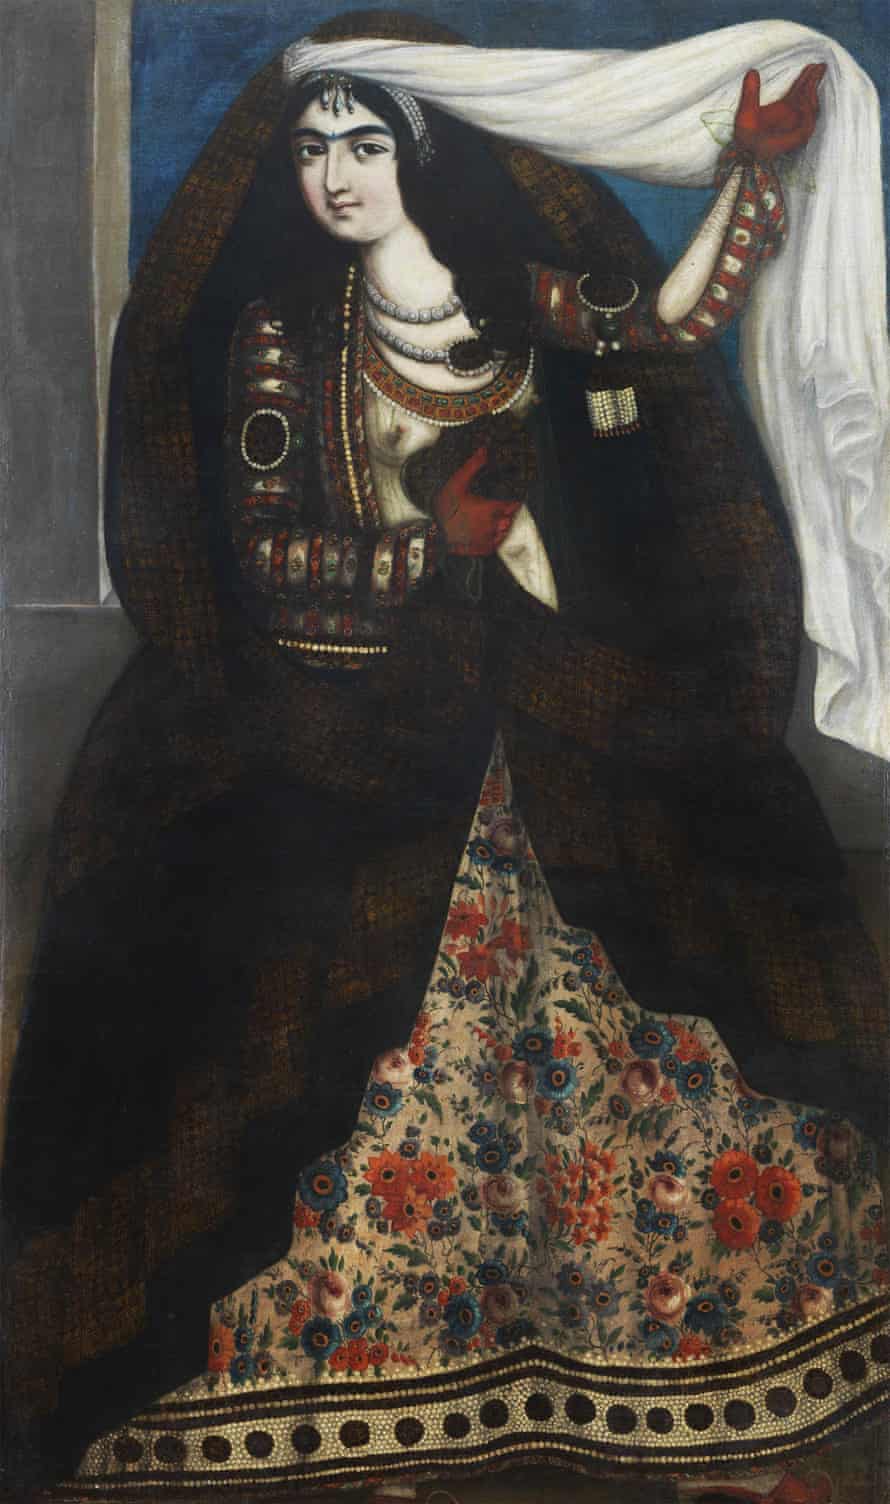 Young woman wearing a chador, circa 1844-1850, by an anonymous artist